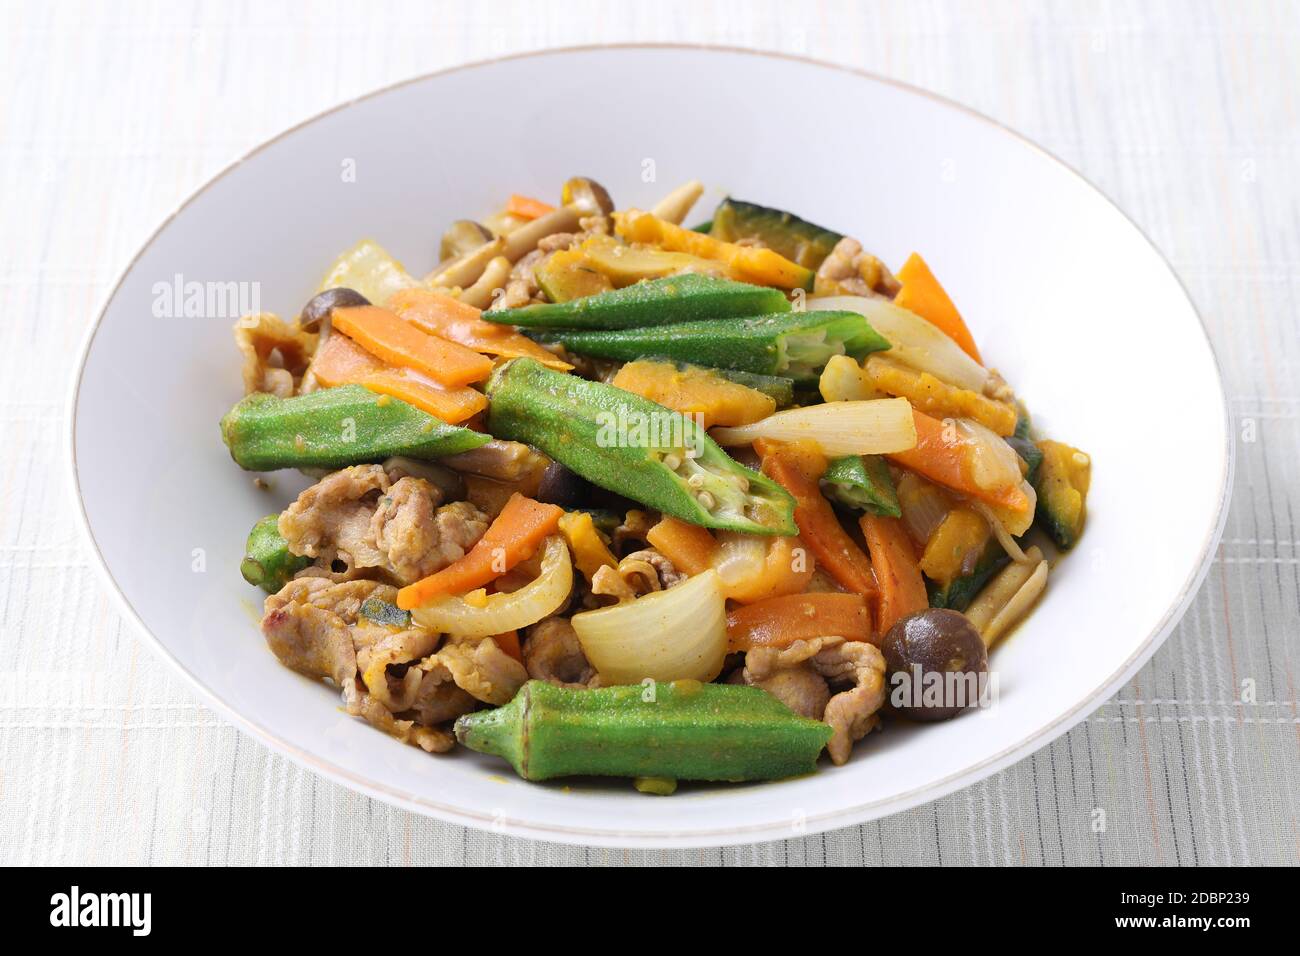 Vegetable stir fry in a plate on white background. Close up Stock Photo